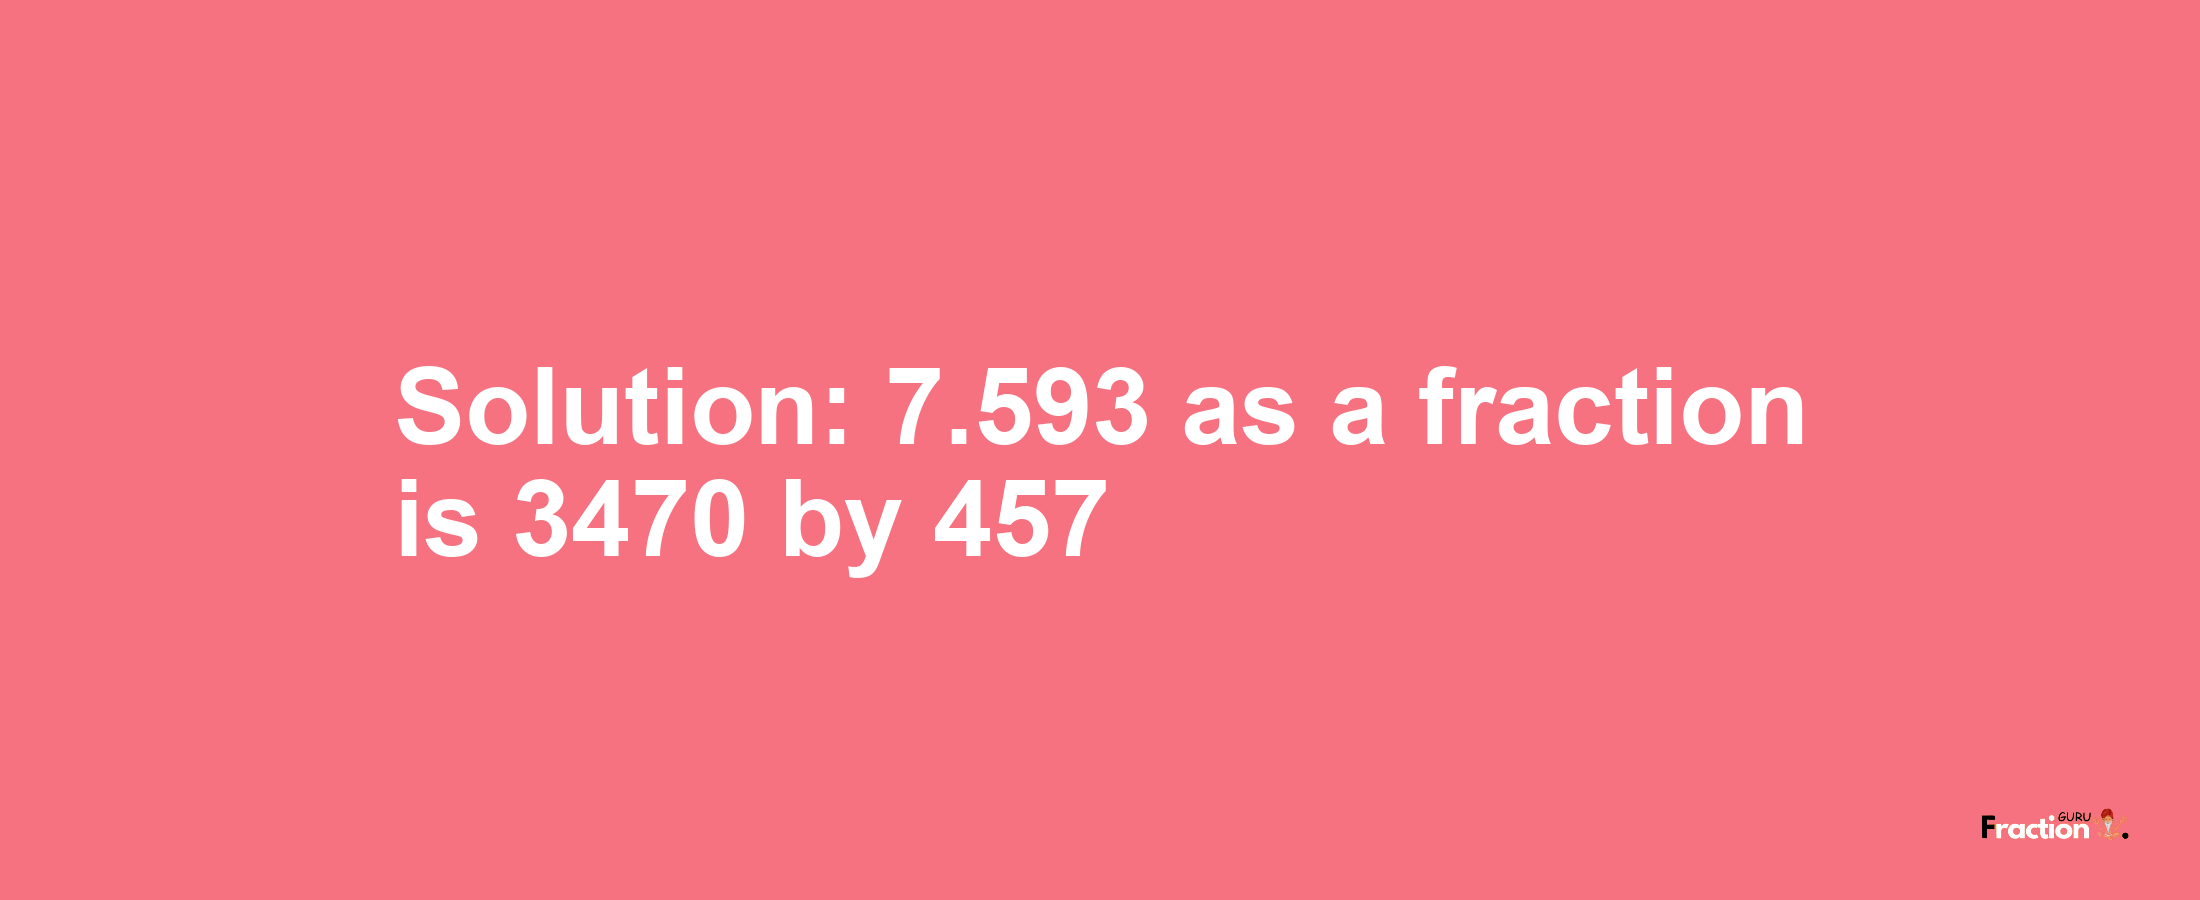 Solution:7.593 as a fraction is 3470/457